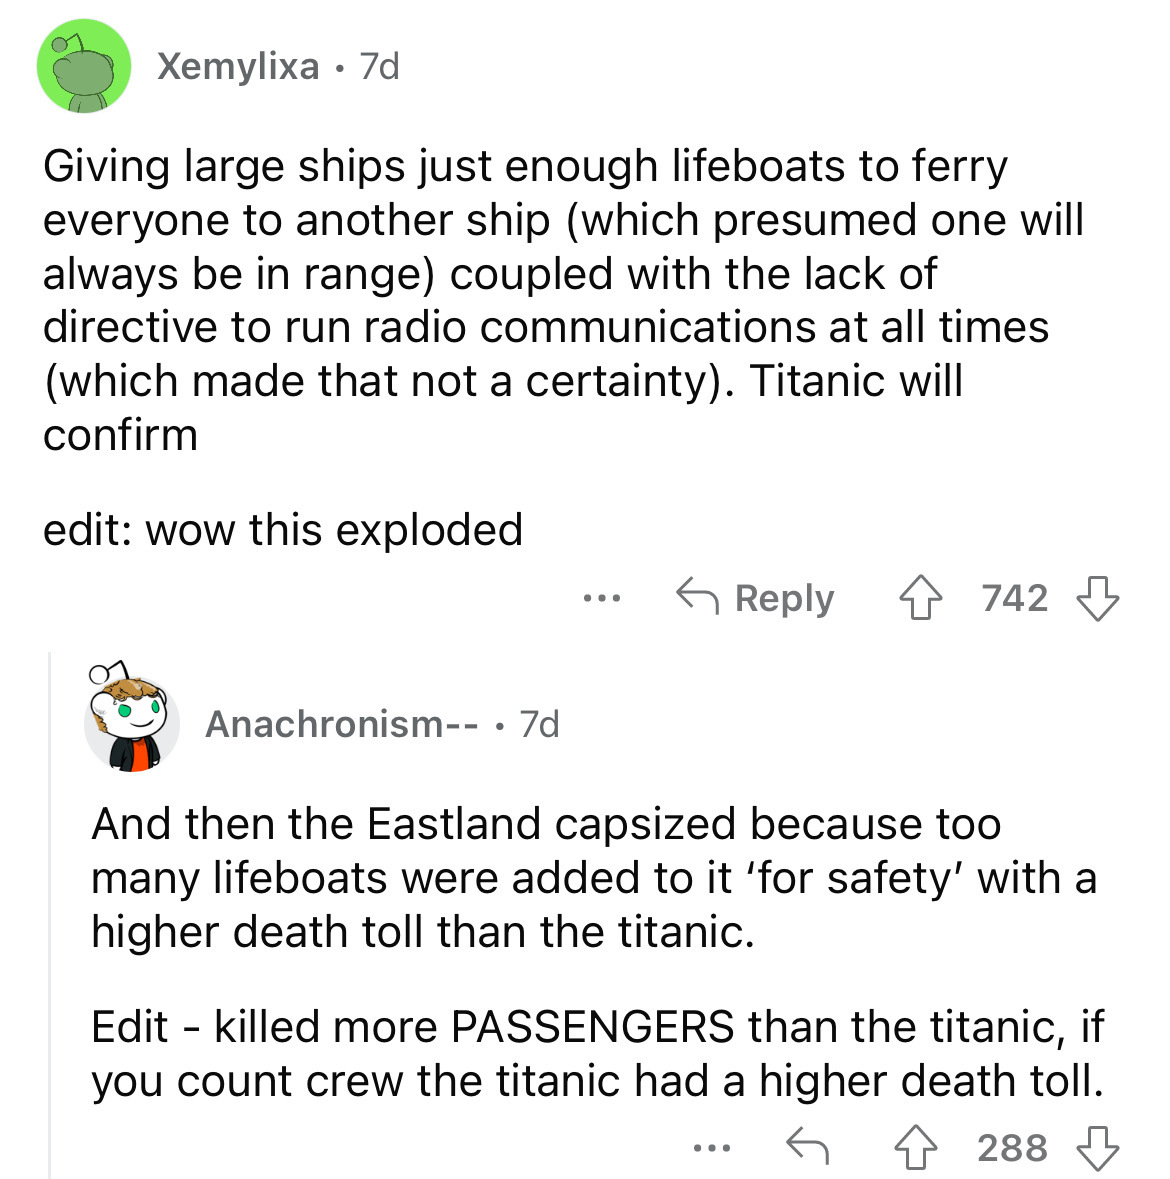 screenshot - Xemylixa 7d Giving large ships just enough lifeboats to ferry everyone to another ship which presumed one will always be in range coupled with the lack of directive to run radio communications at all times which made that not a certainty. Tit